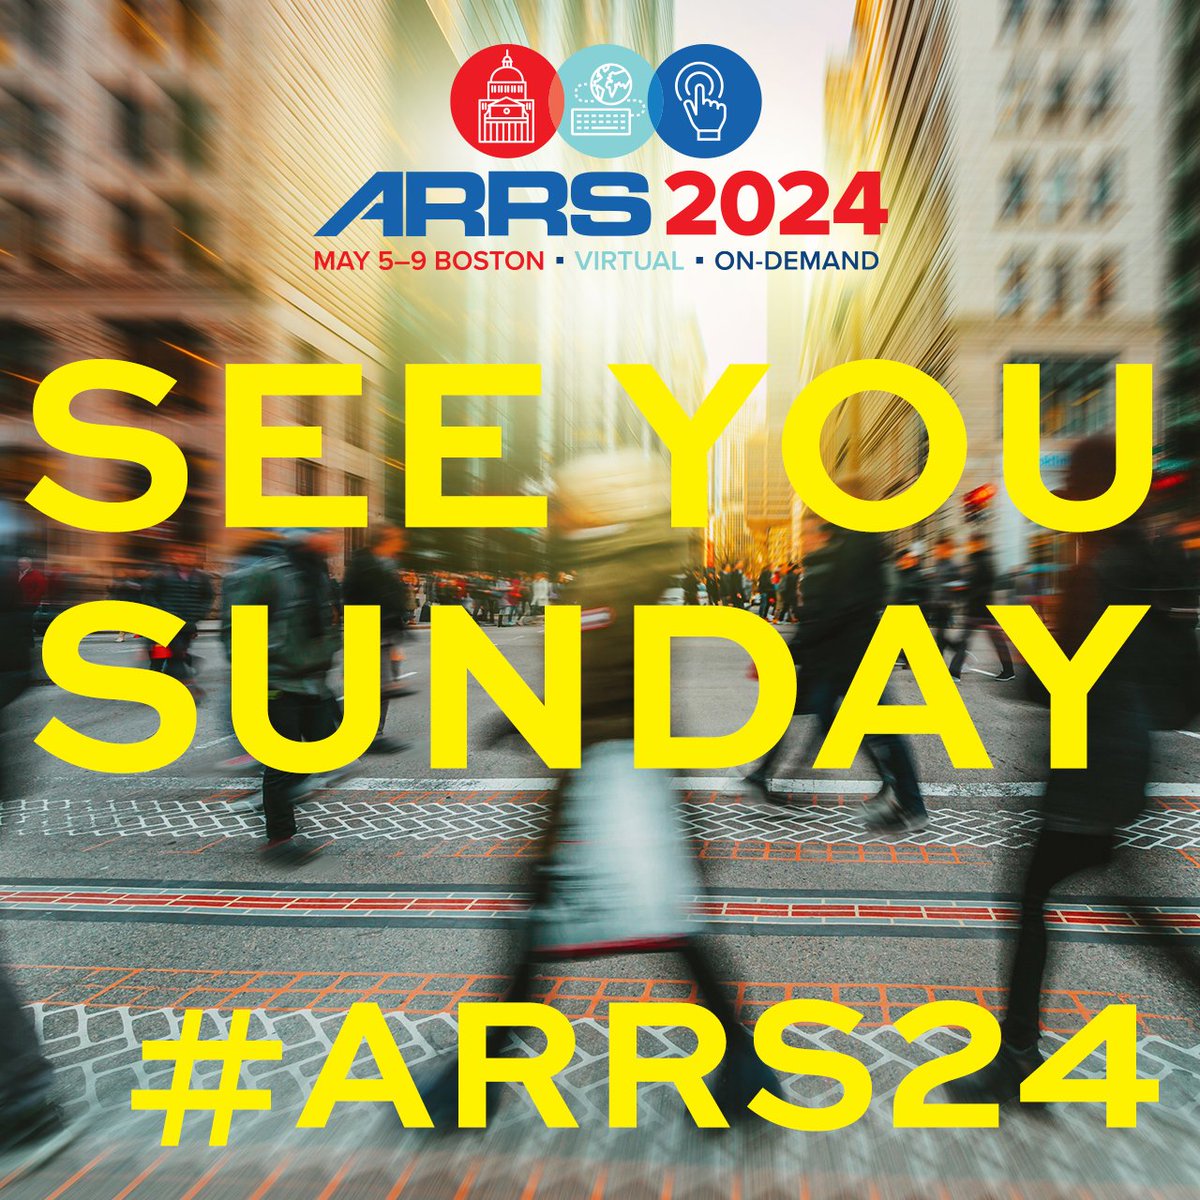 We're so excited to welcome you to Boston! Reminder: you can register up until the end of the meeting, May 9, 2024. All registrants can stream sessions live and on demand for one year. Register now: www2.arrs.org/am24/registrat…